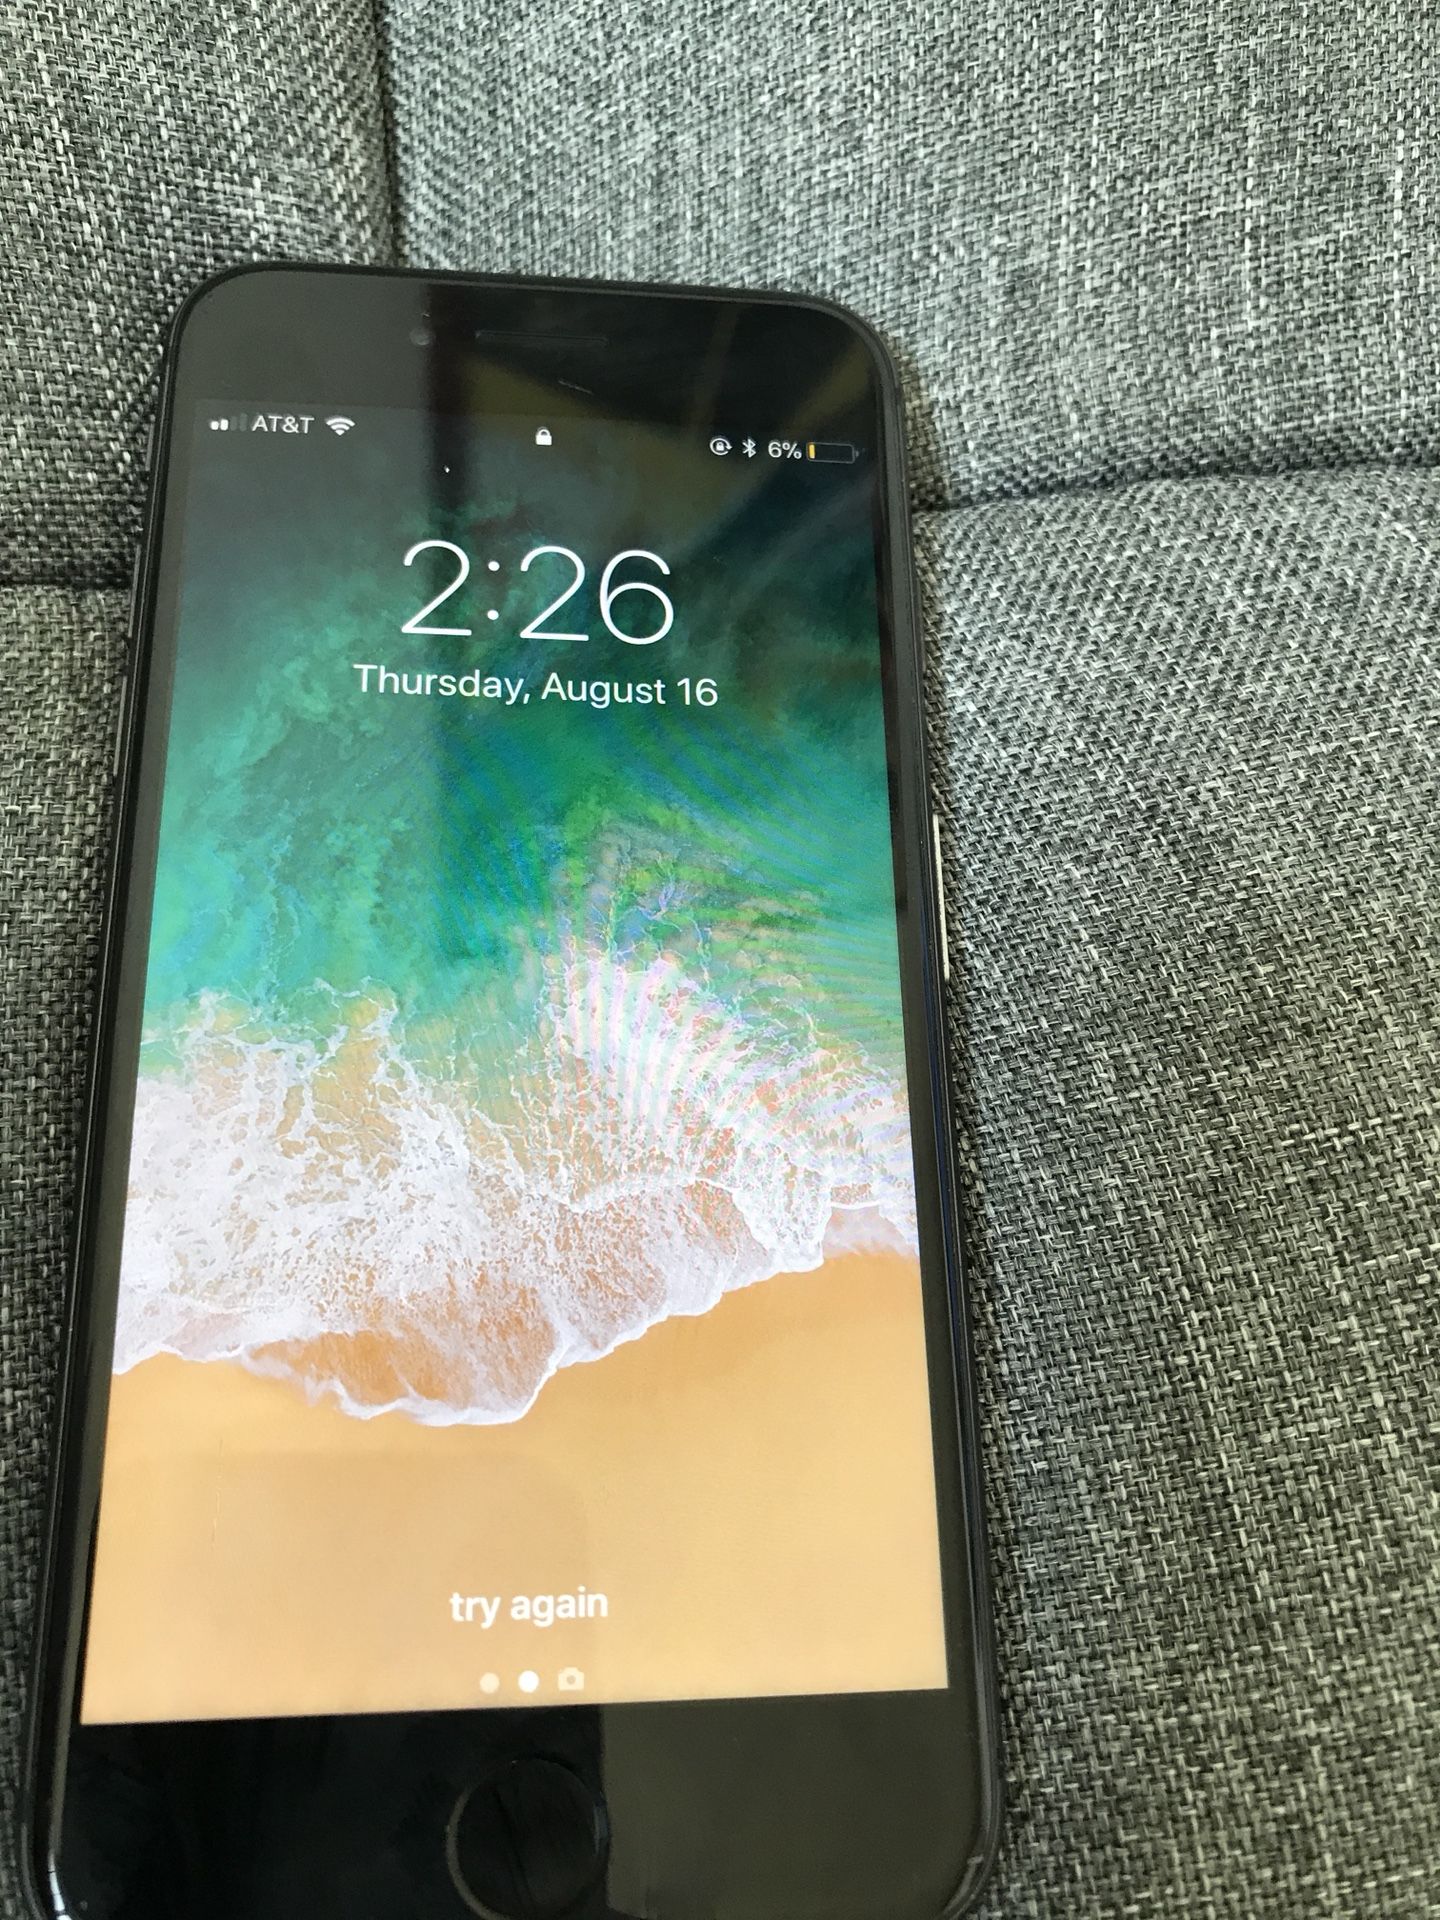 At&t iphone 8 120g